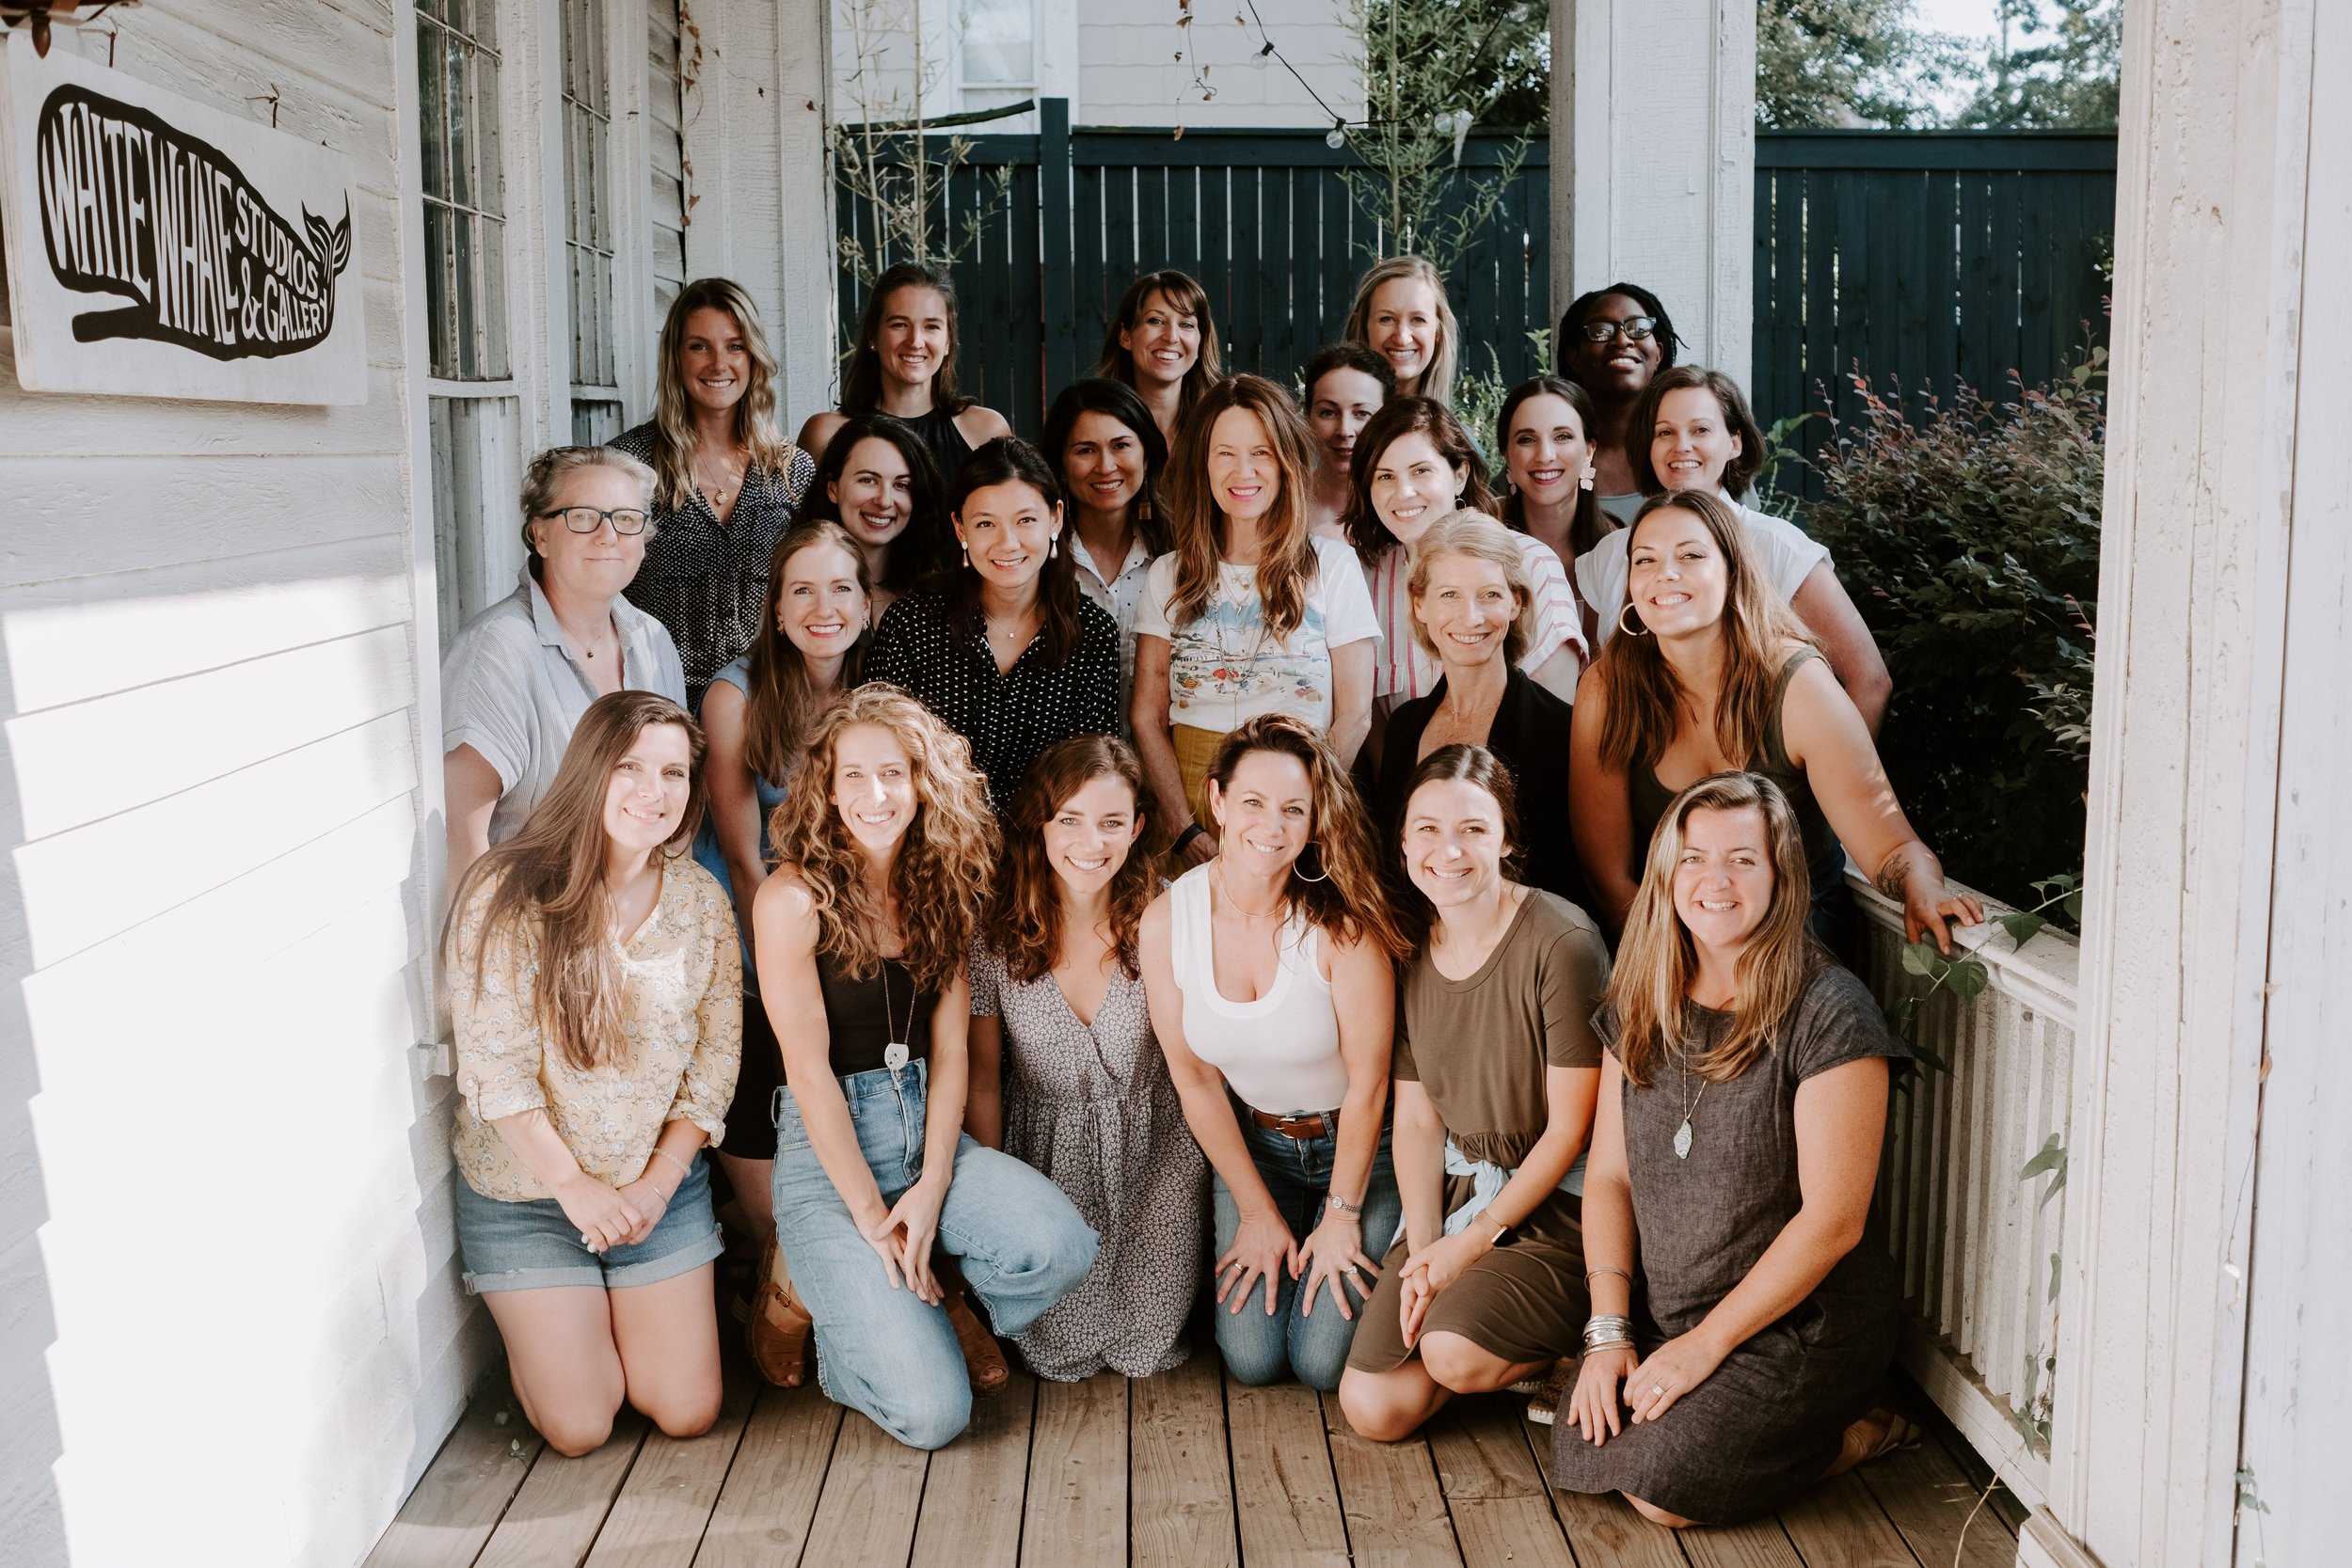  This little adventure was one for the books. I didn’t realize quite what I was signing up for when I applied to  @emily_jeffords  mastermind a year ago, but I am extraordinarily grateful I did. Spending a year meeting with these brilliant women, learning from them, being challenged and encouraged by them, and growing together has been one of the most meaningful parts of my life as an artist so far. Being together in person this past week (which makes me laugh because I guess we technically all met on the internet) reminded me what a gift community is, in all parts of life. I am filled to the brim. 